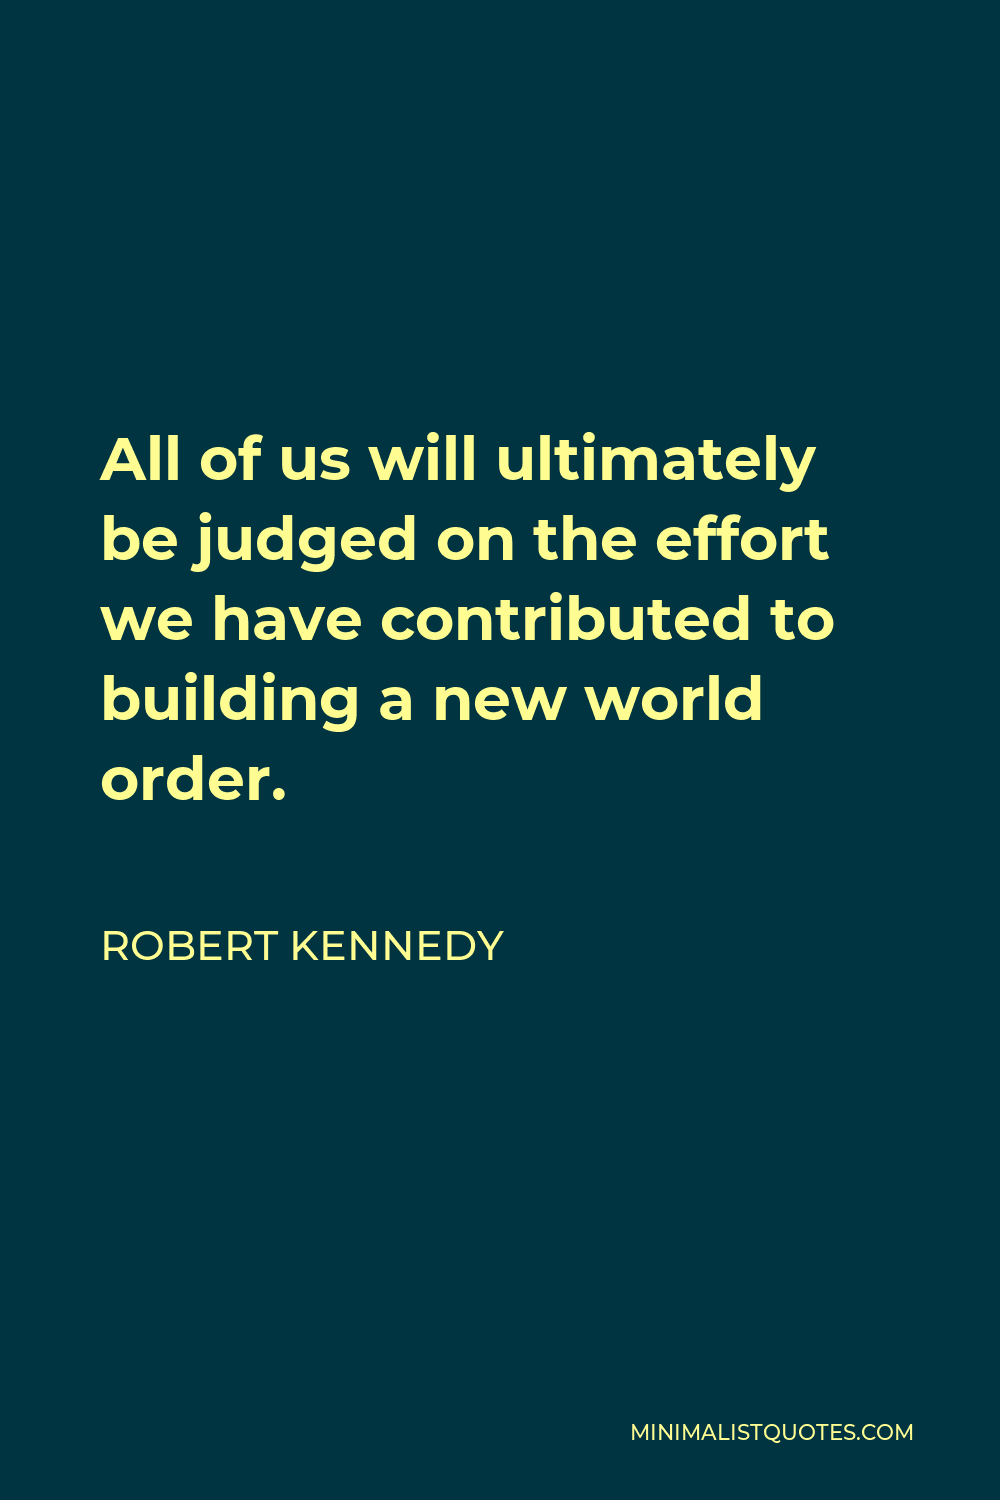 Robert Kennedy Quote - All of us will ultimately be judged on the effort we have contributed to building a new world order.